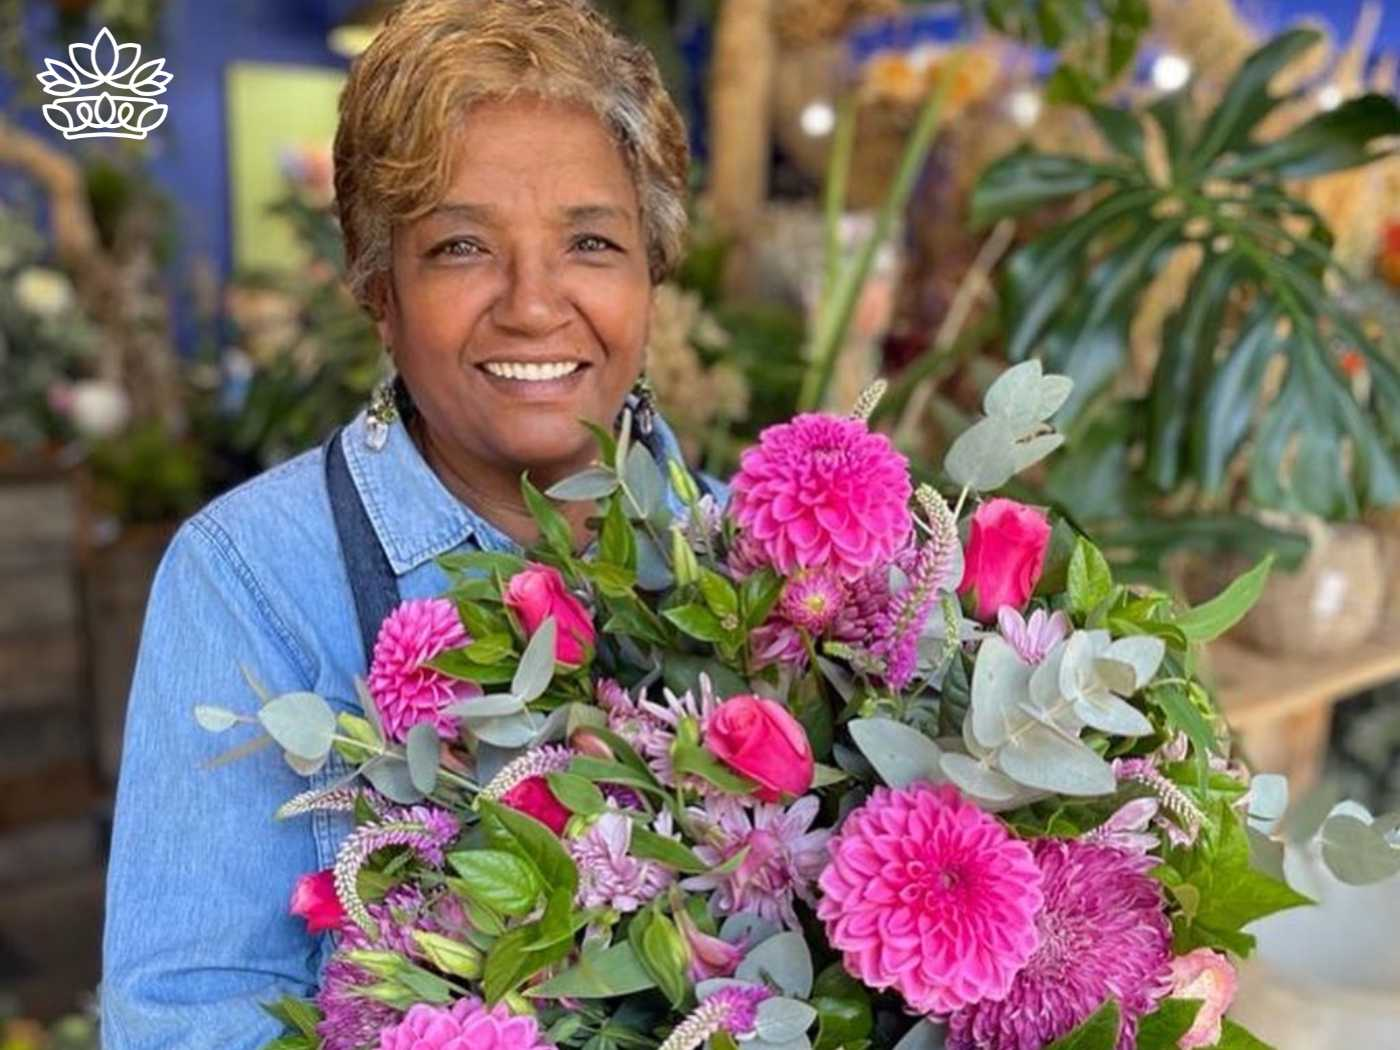 Smiling florist holding a colourful bouquet from the Flowers By Type Collection, featuring vibrant pink blooms in varying sizes, from Fabulous Flowers and Gifts. Perfect for brightening any page or growing your floral collection.